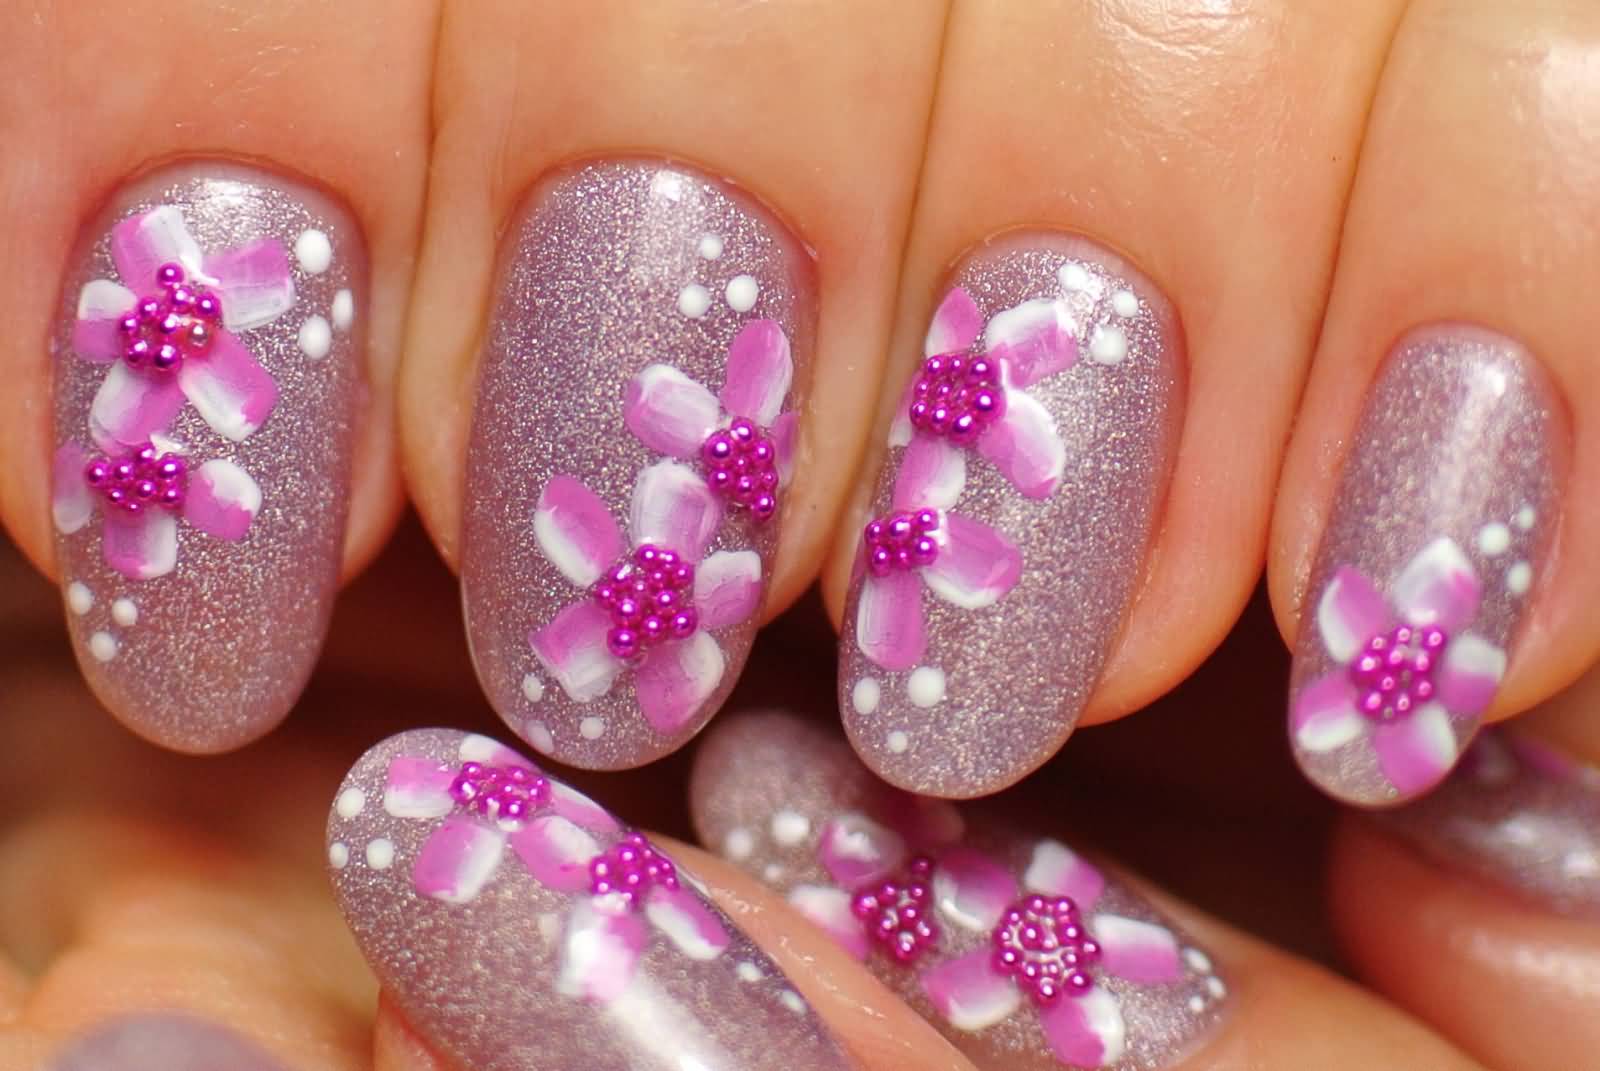 Pink Holographic And Flowers Nail Art Design Idea